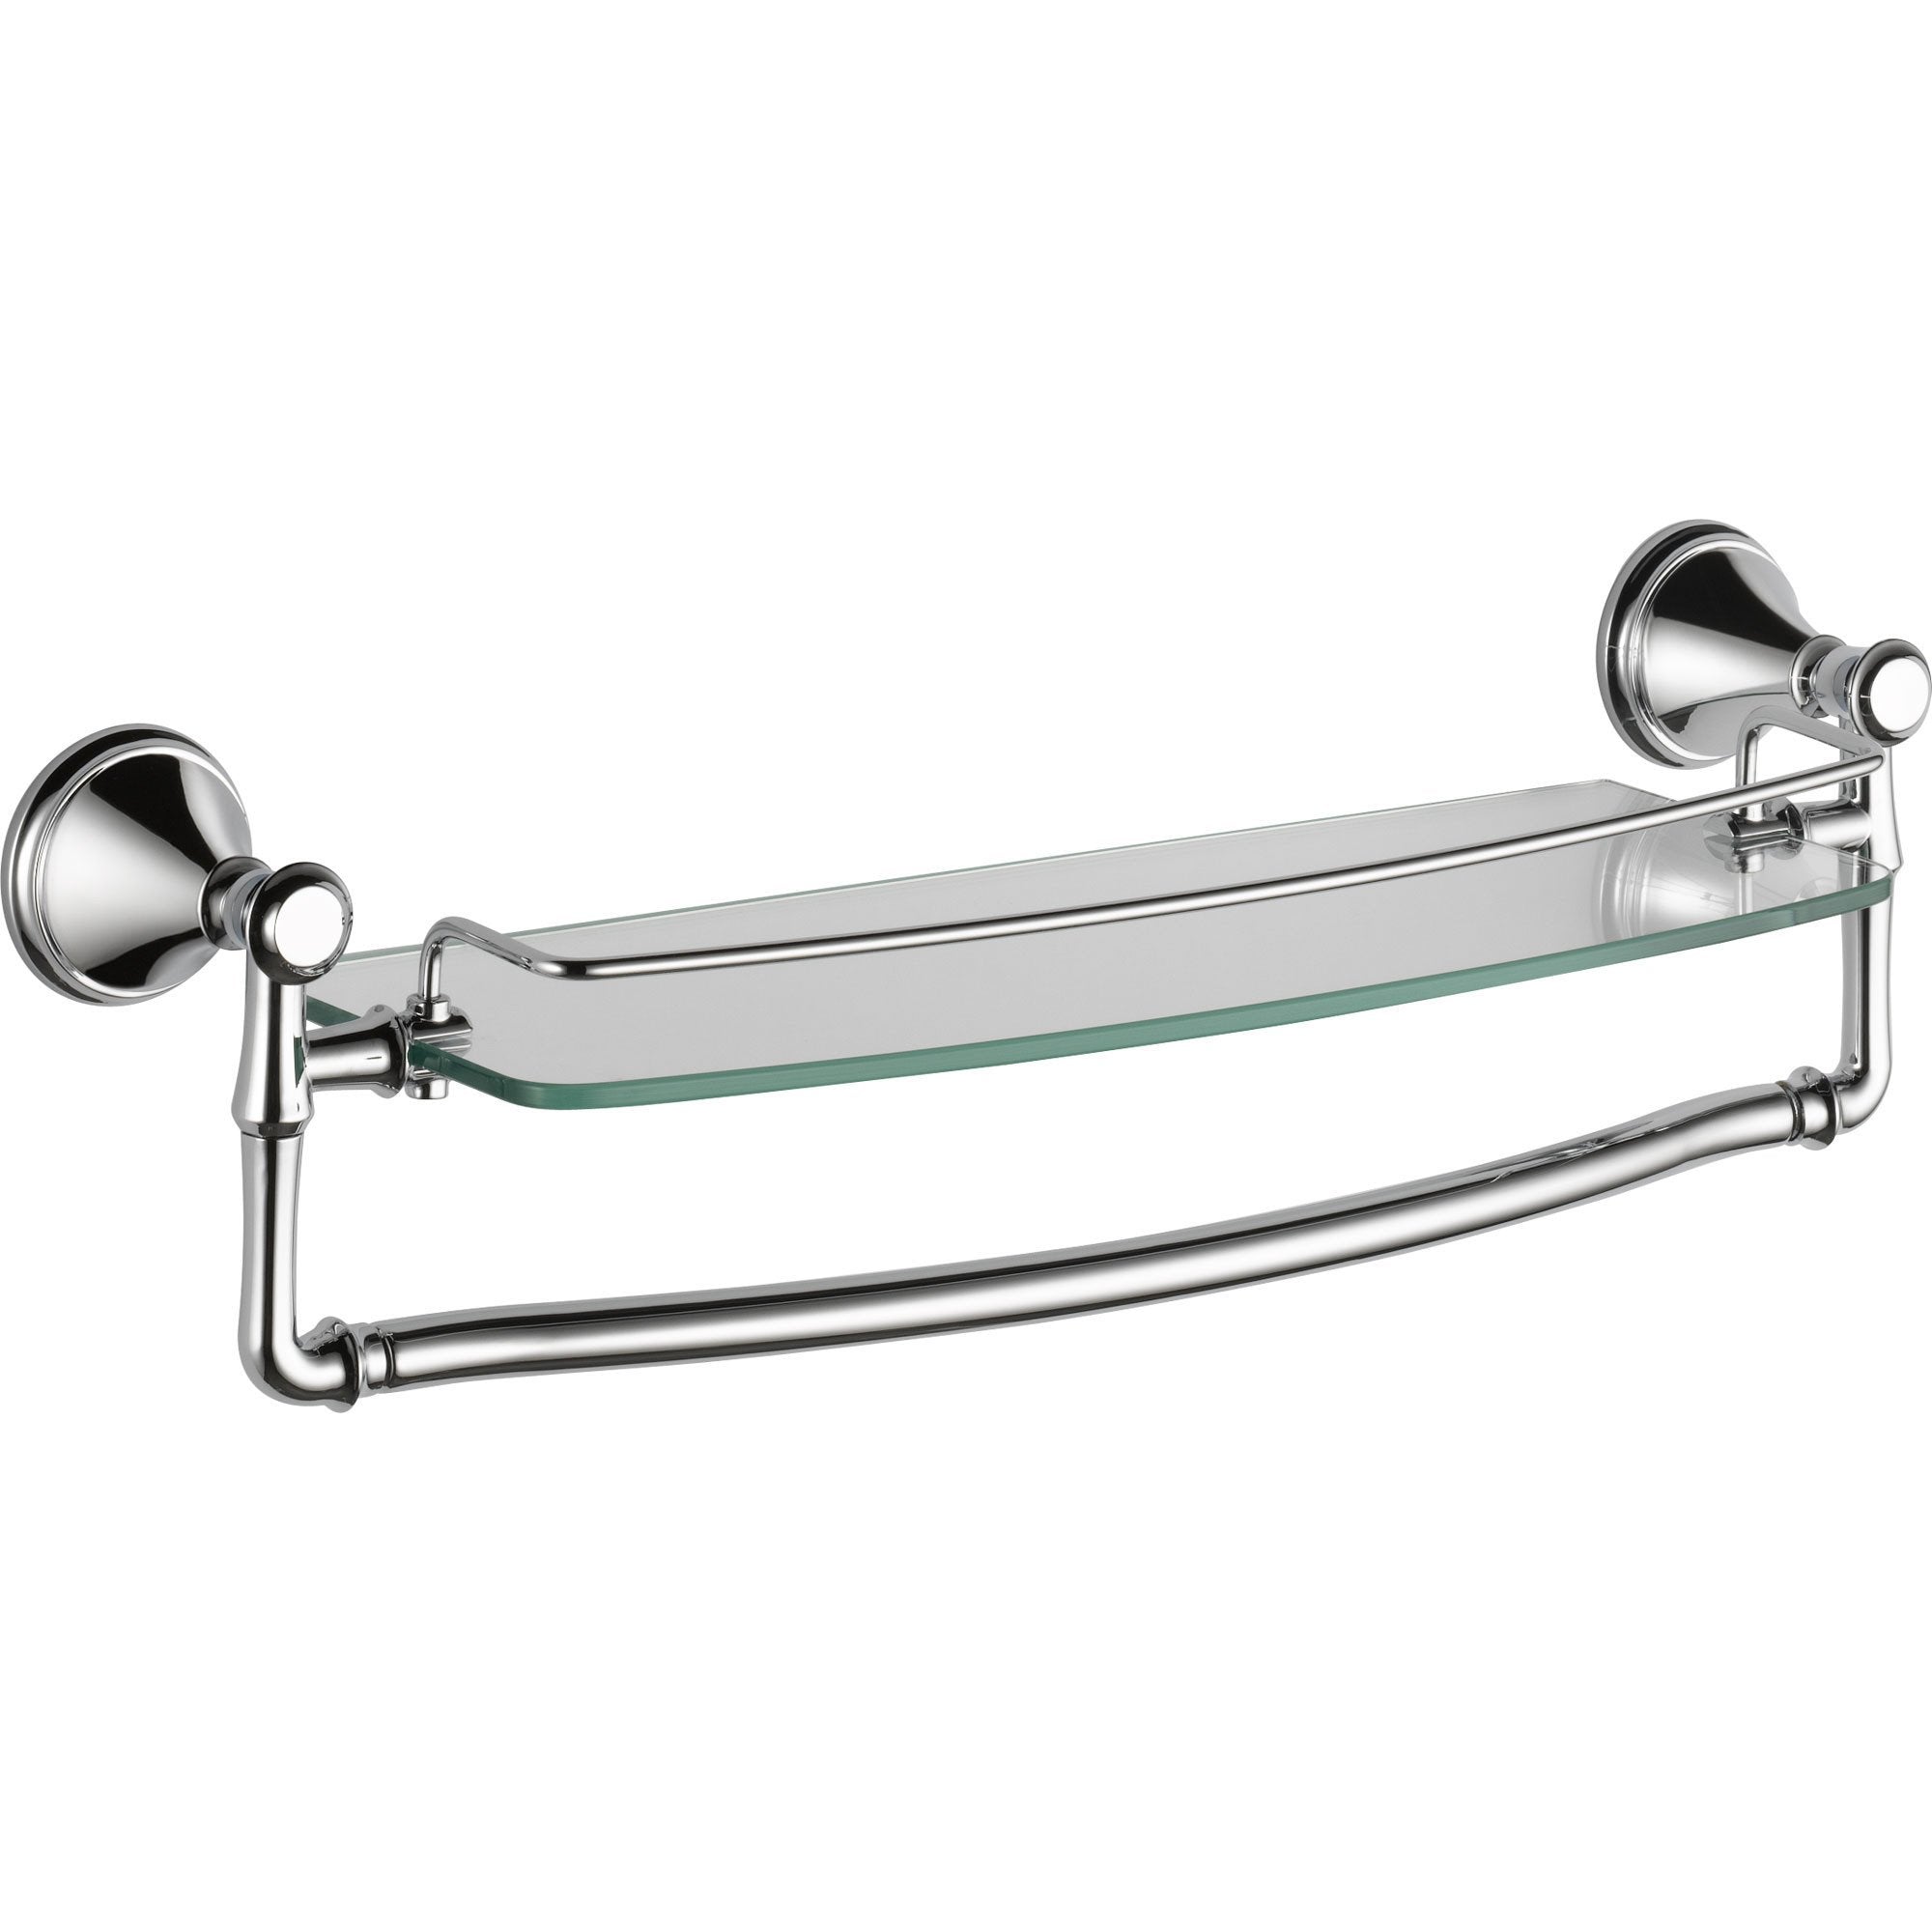 Delta Cassidy Chrome 18 inch Glass Shelf with Removable Towel Bar 579483